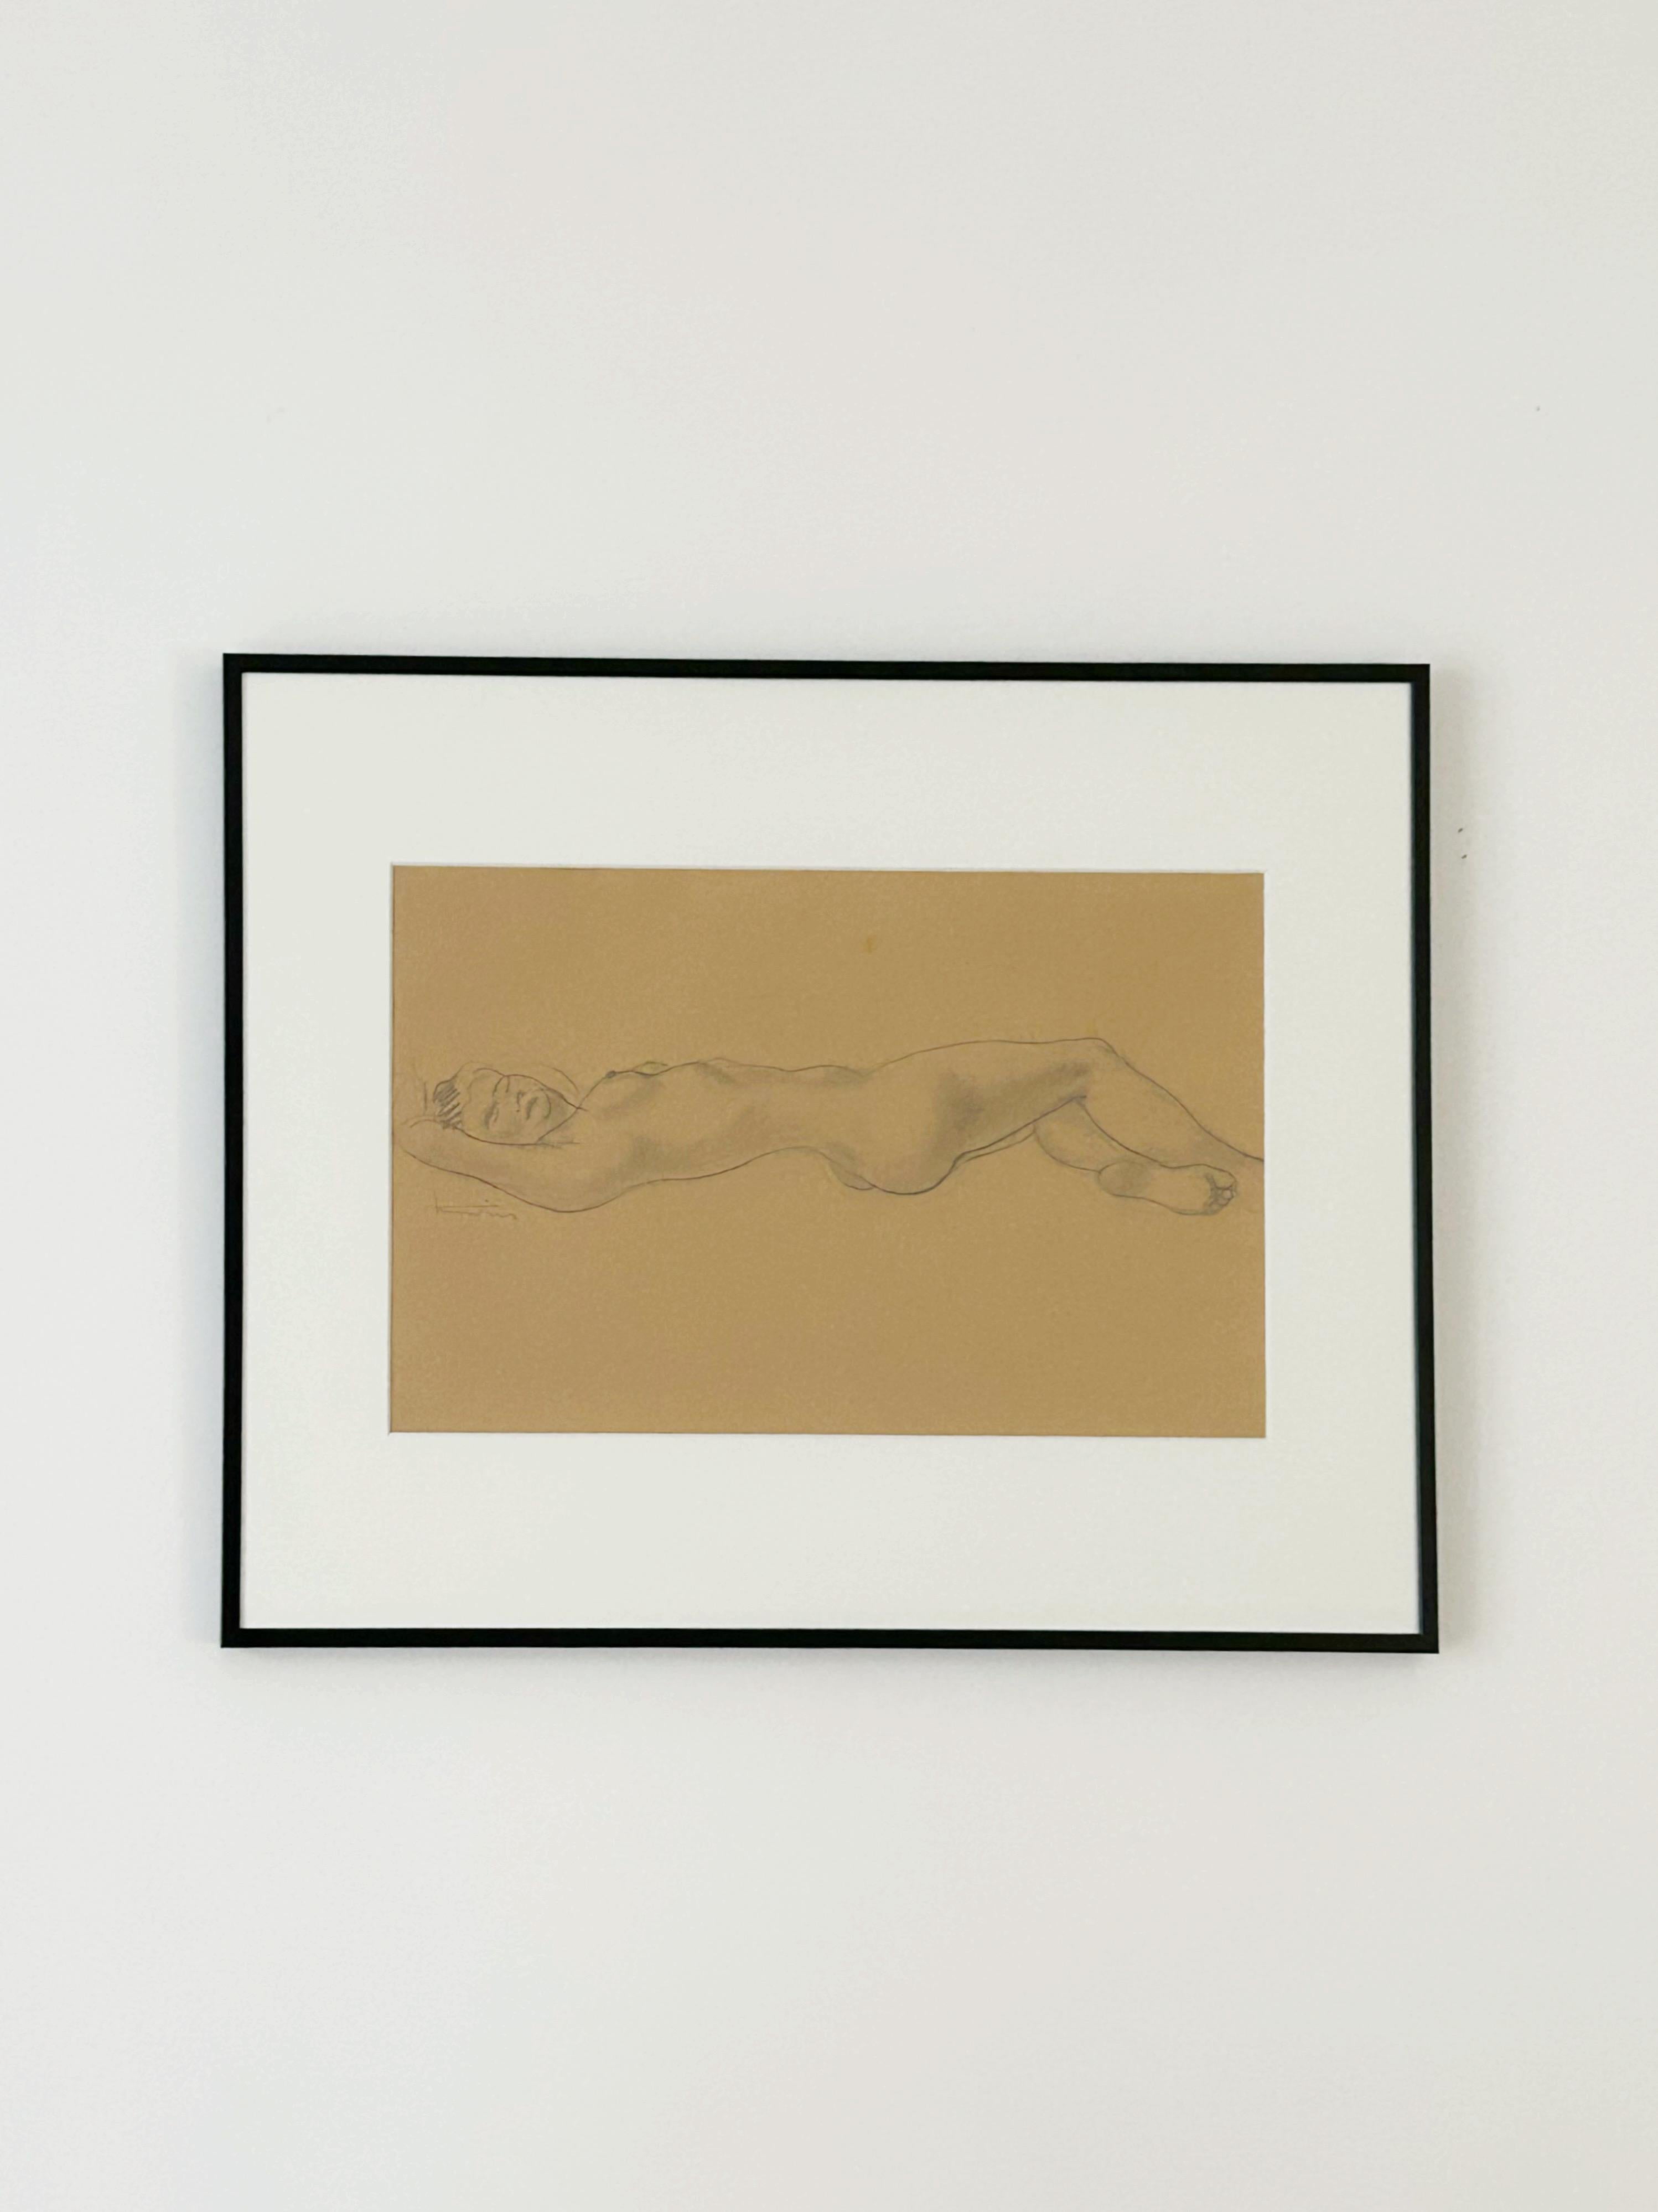 Jean MARTIN (1911-1996)
Female nude, circa 1940
Pencil on paper
Signed on the left
25 x 38 cm
frame : 40 x 50 cm

A self-taught painter born in Lyon in 1911, Jean Martin developed a style of reality painting on the bangs of the debates surrounding